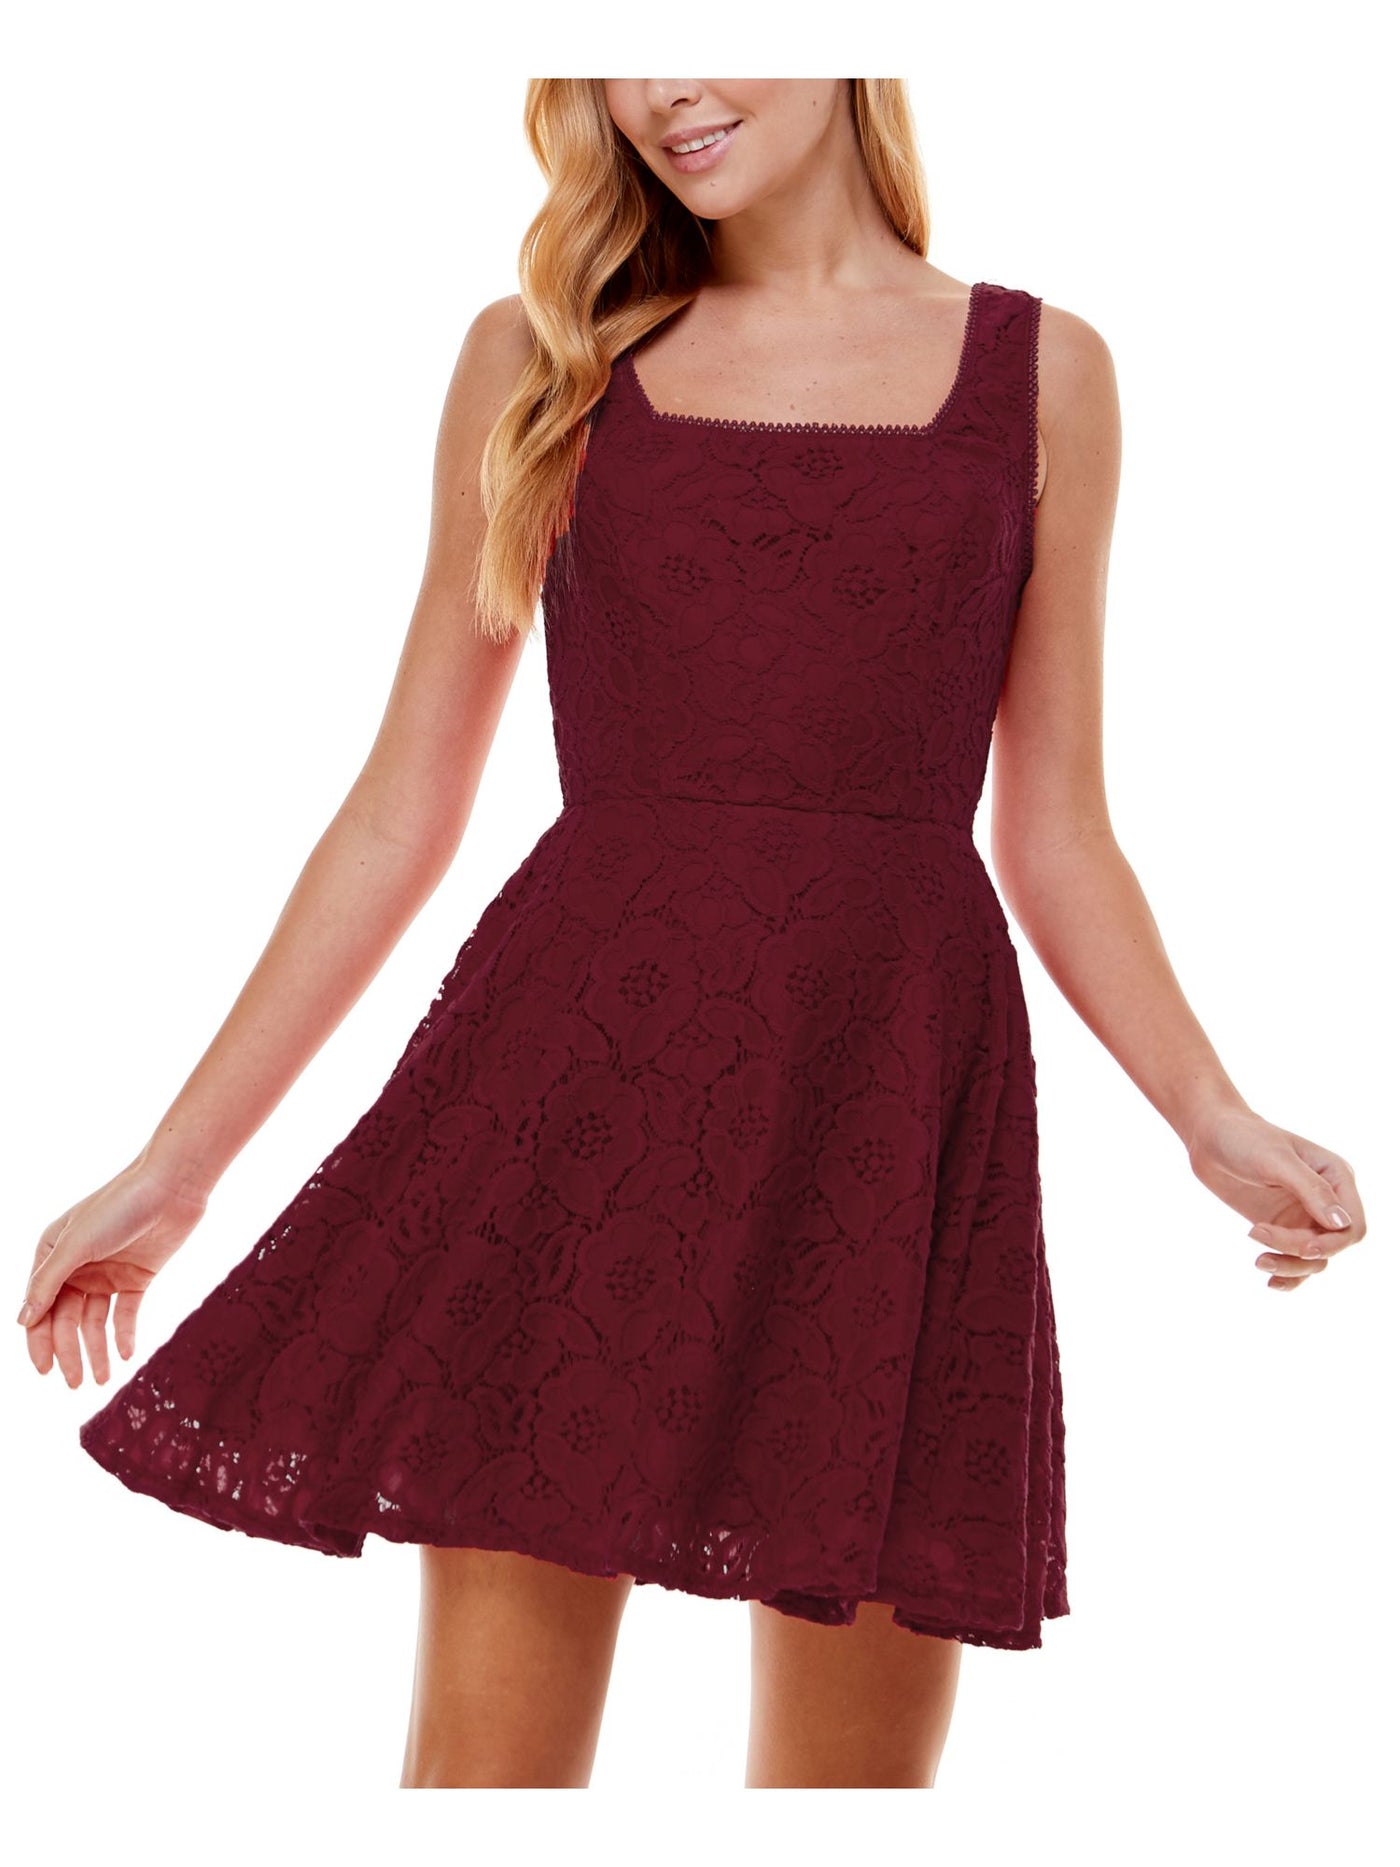 CITY STUDIO Womens Maroon Lace Zippered Fitted Lined Sleeveless Square Neck Mini Party Fit + Flare Dress Juniors 11